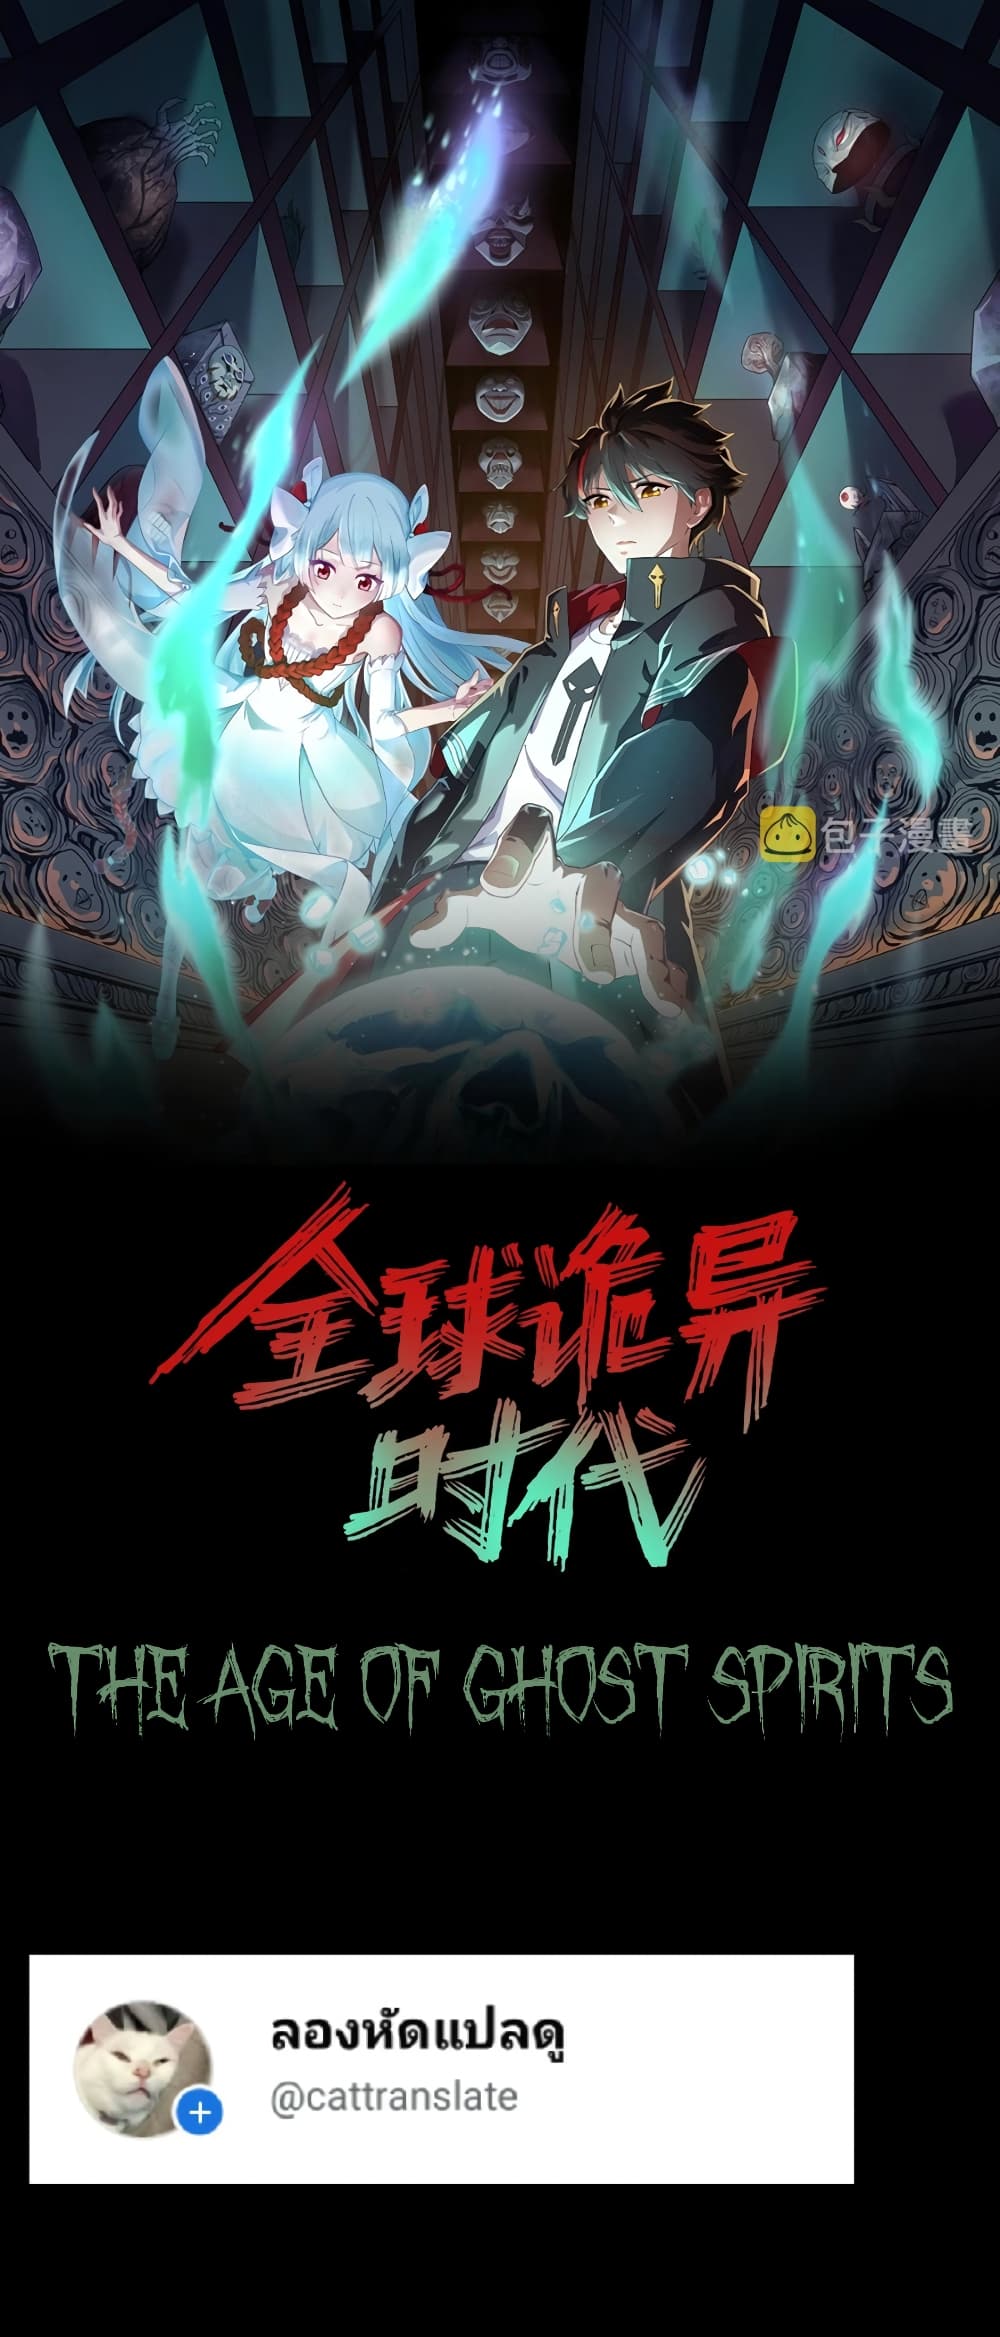 The Age of Ghost Spirits à¸à¸­à¸à¸à¸µà¹ 42 (1)